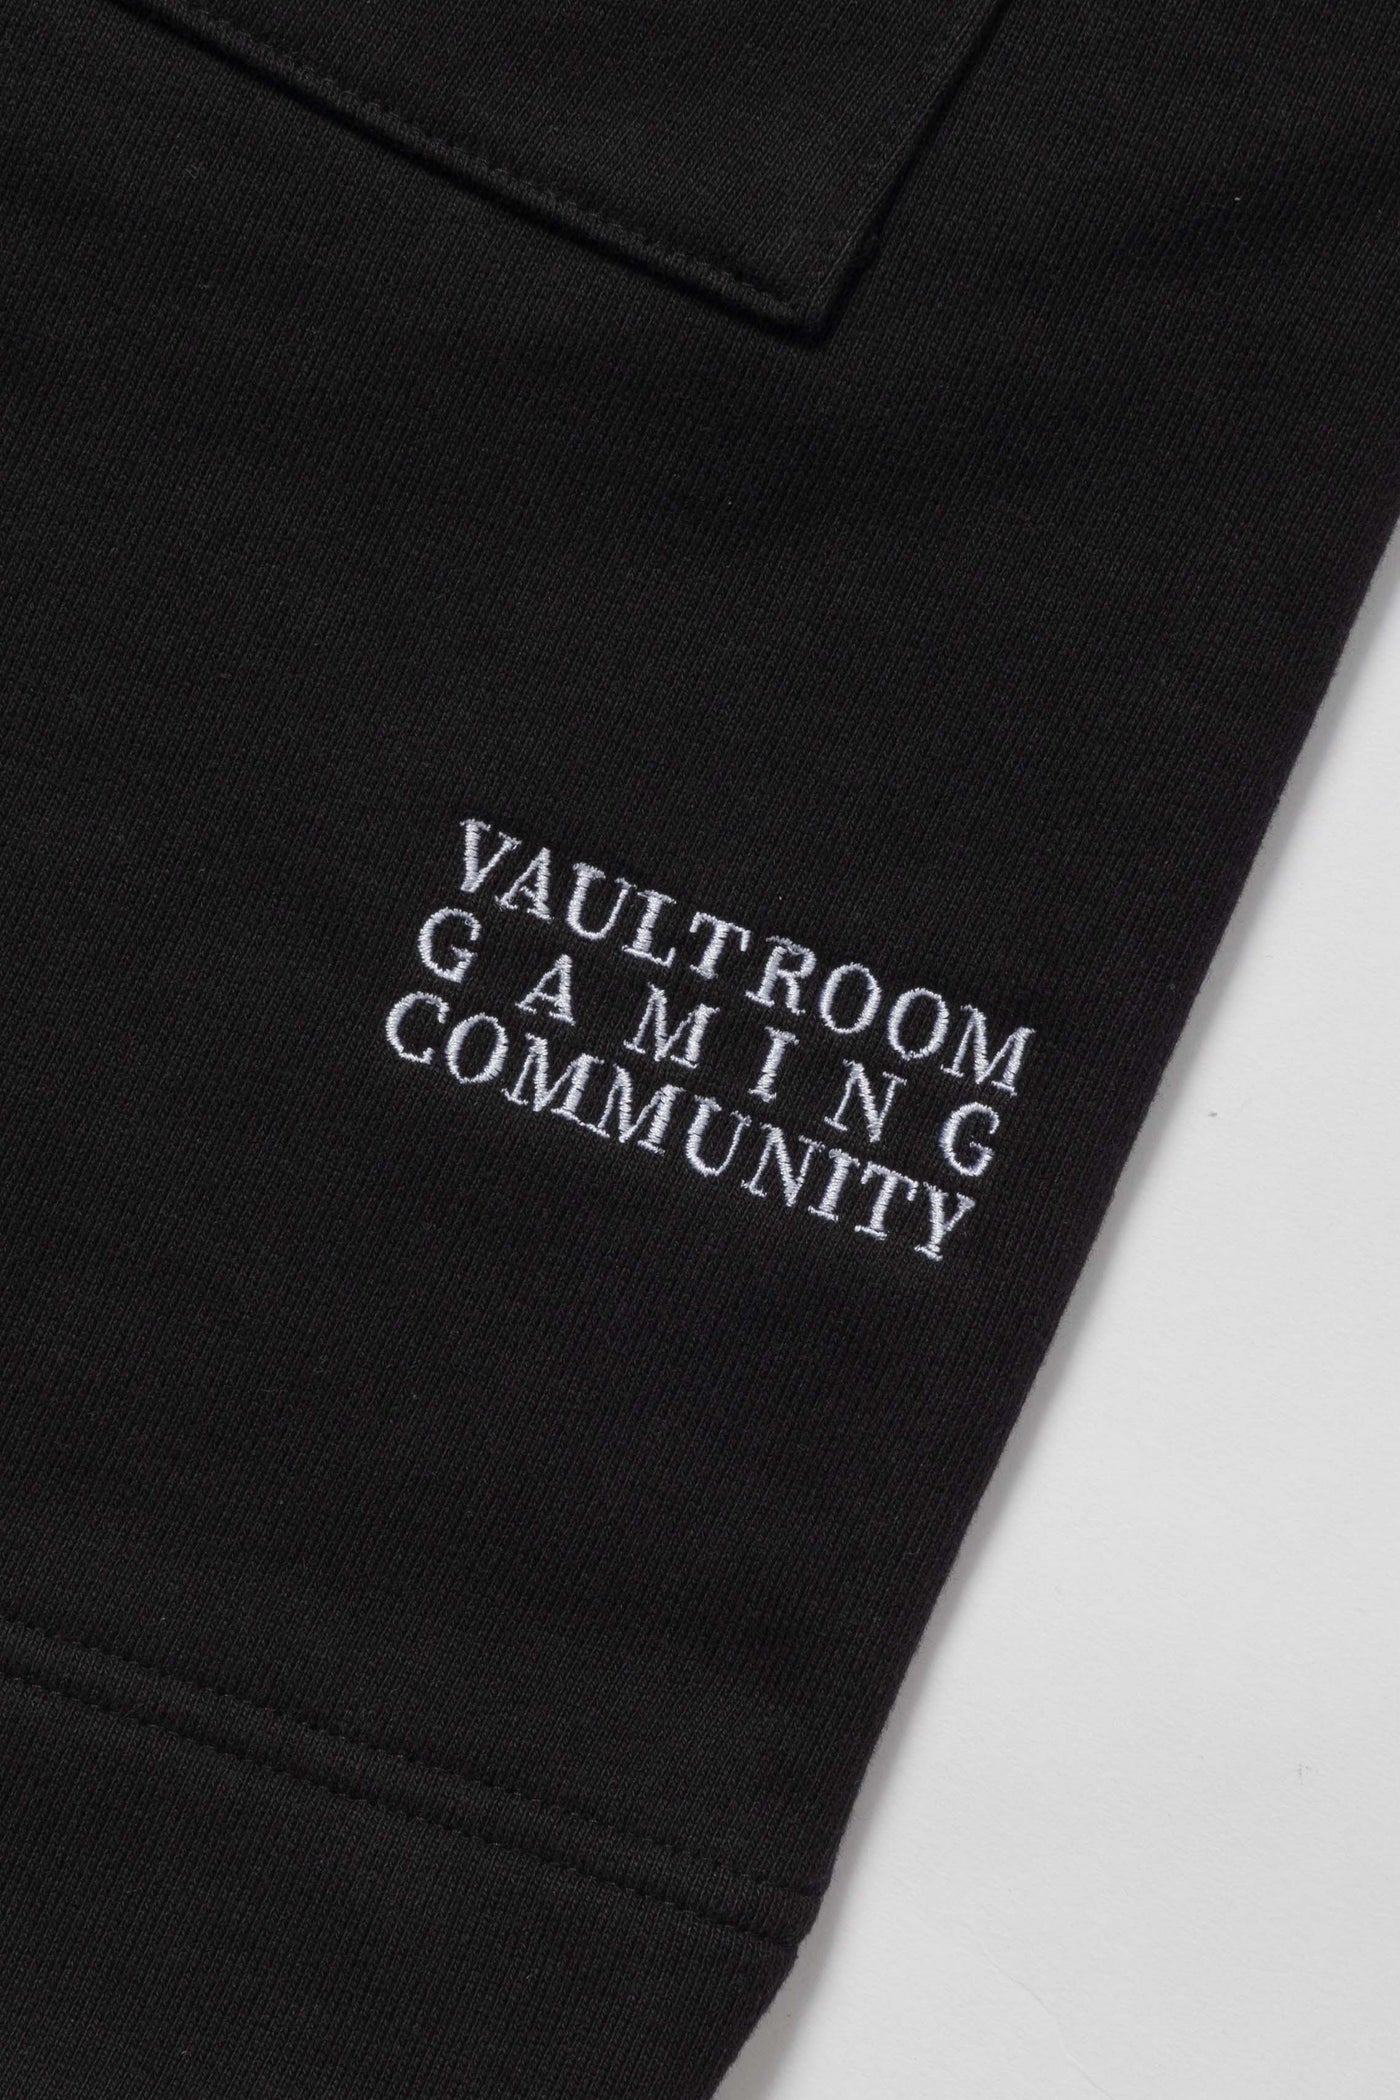 VGC FRENCH TERRY SHORTS / BLACK – VAULTROOM